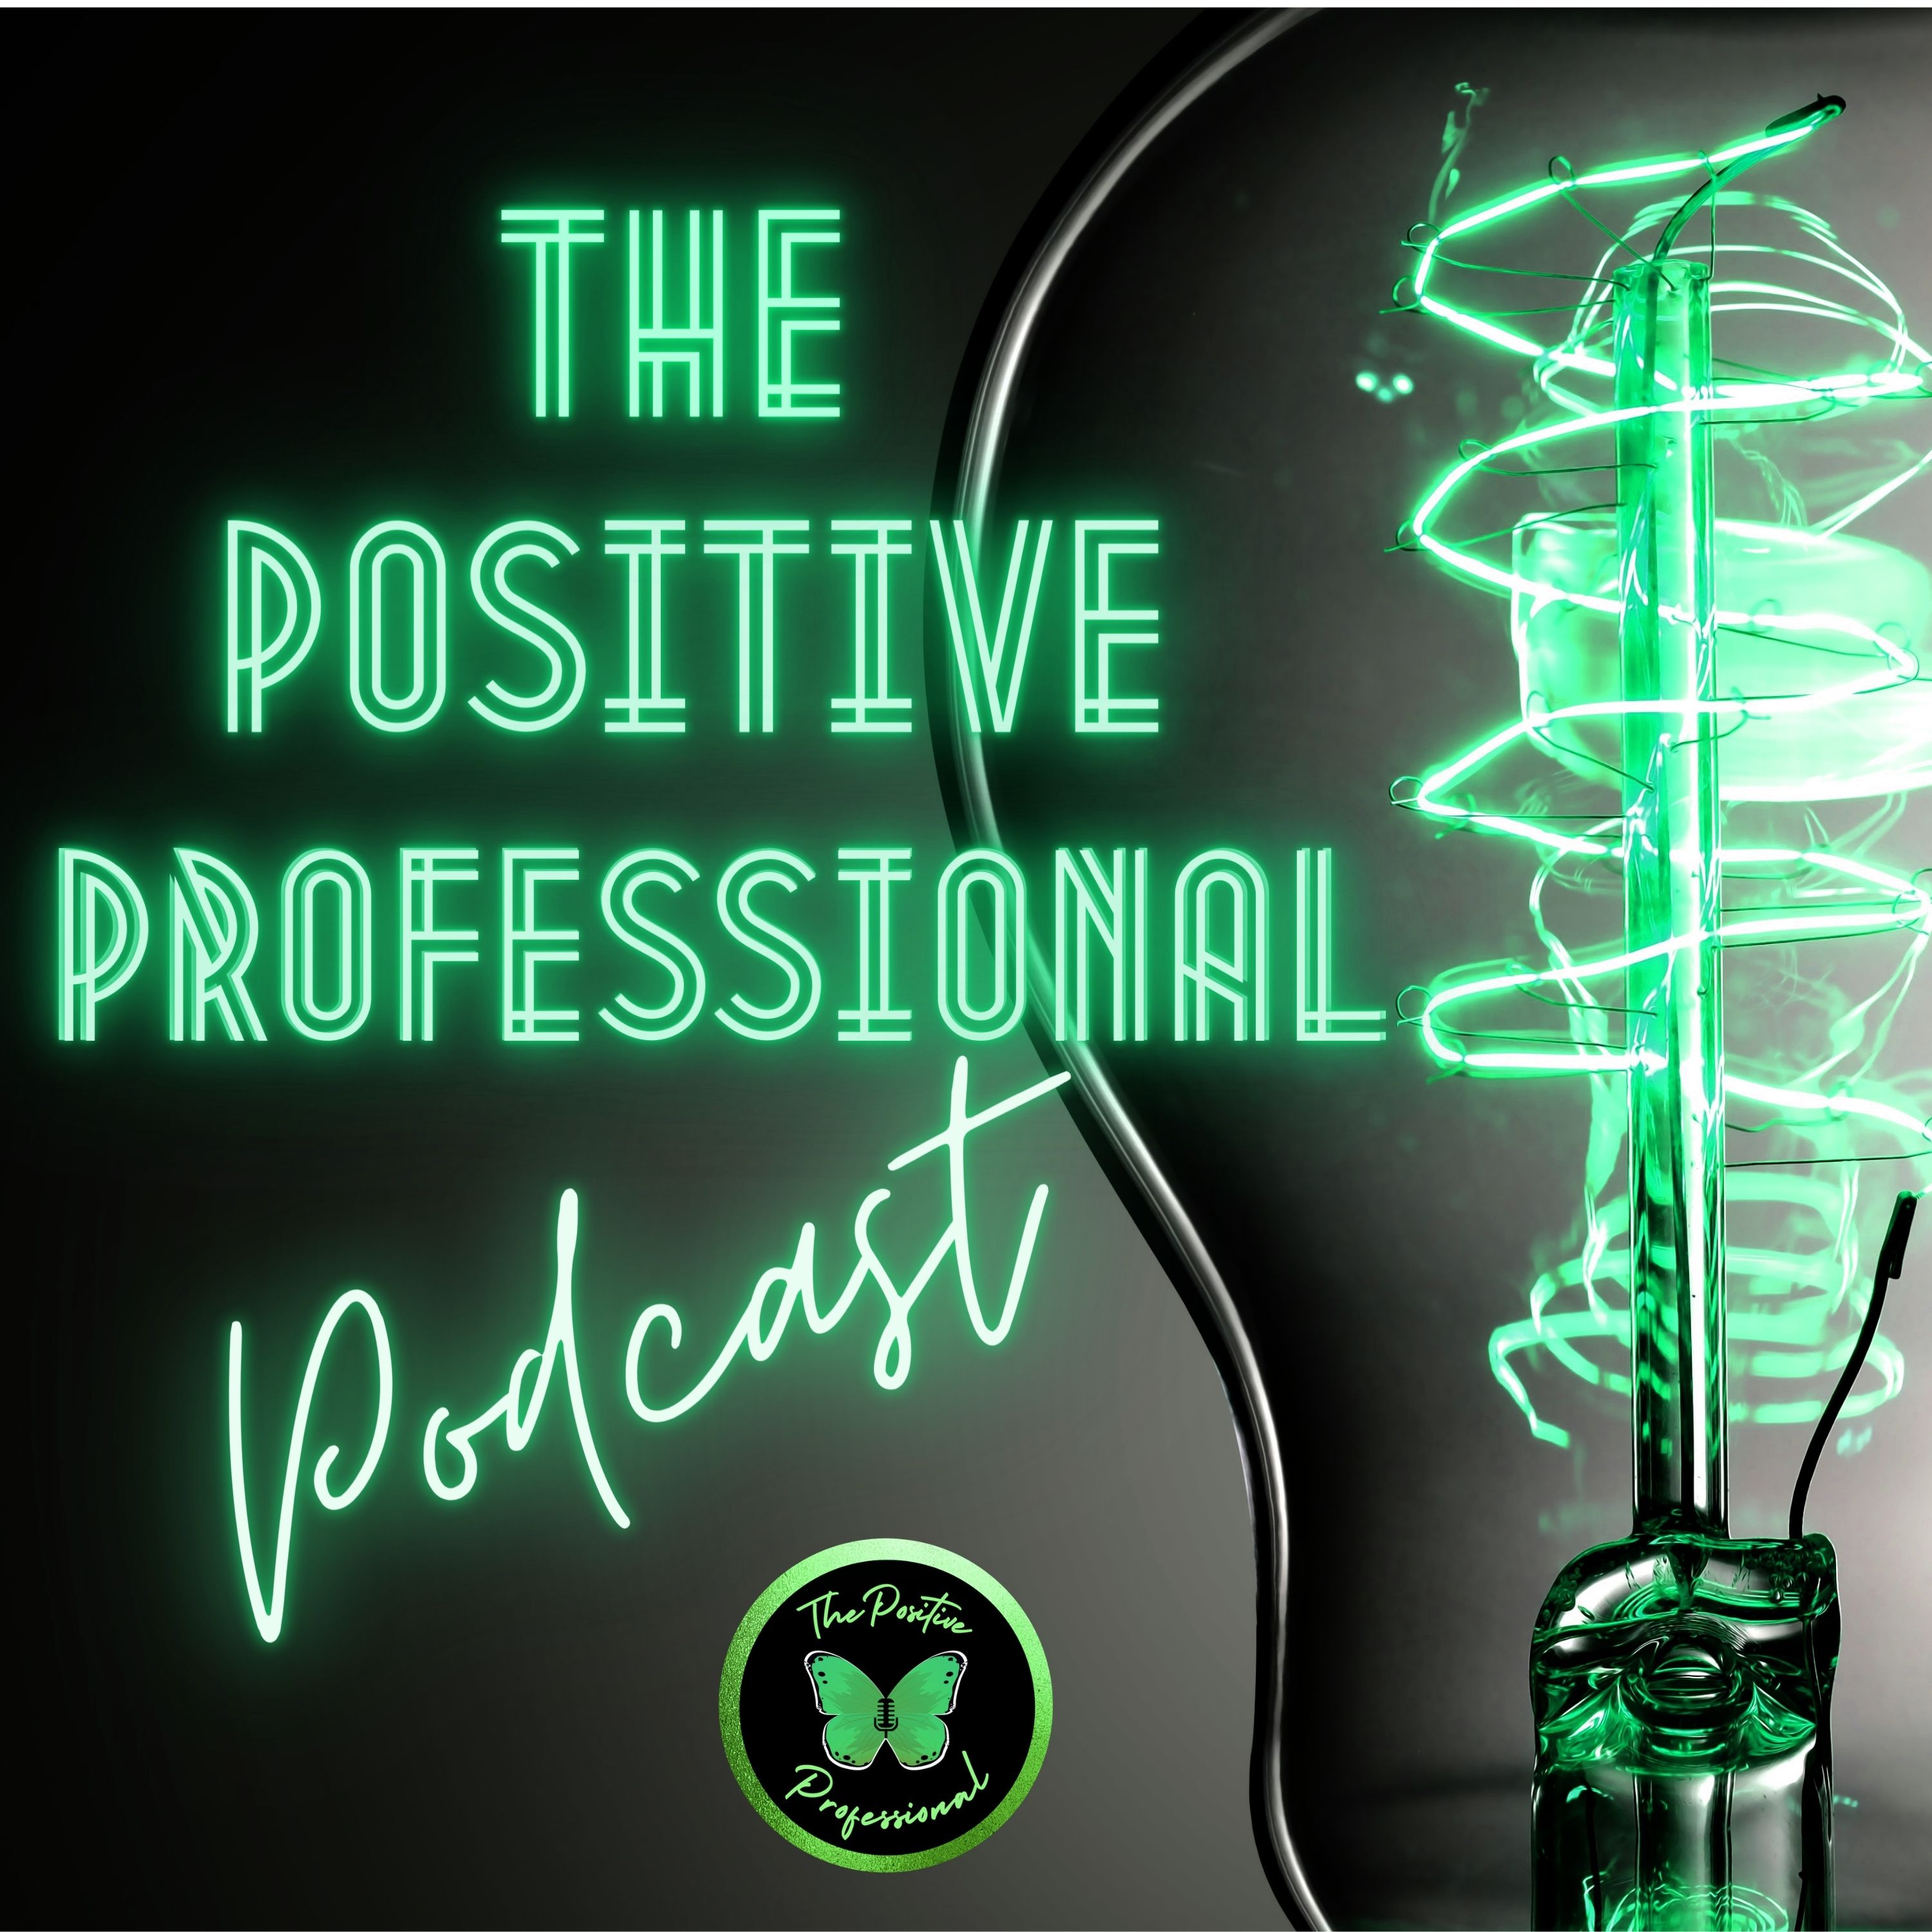 The Positive Professional podcast